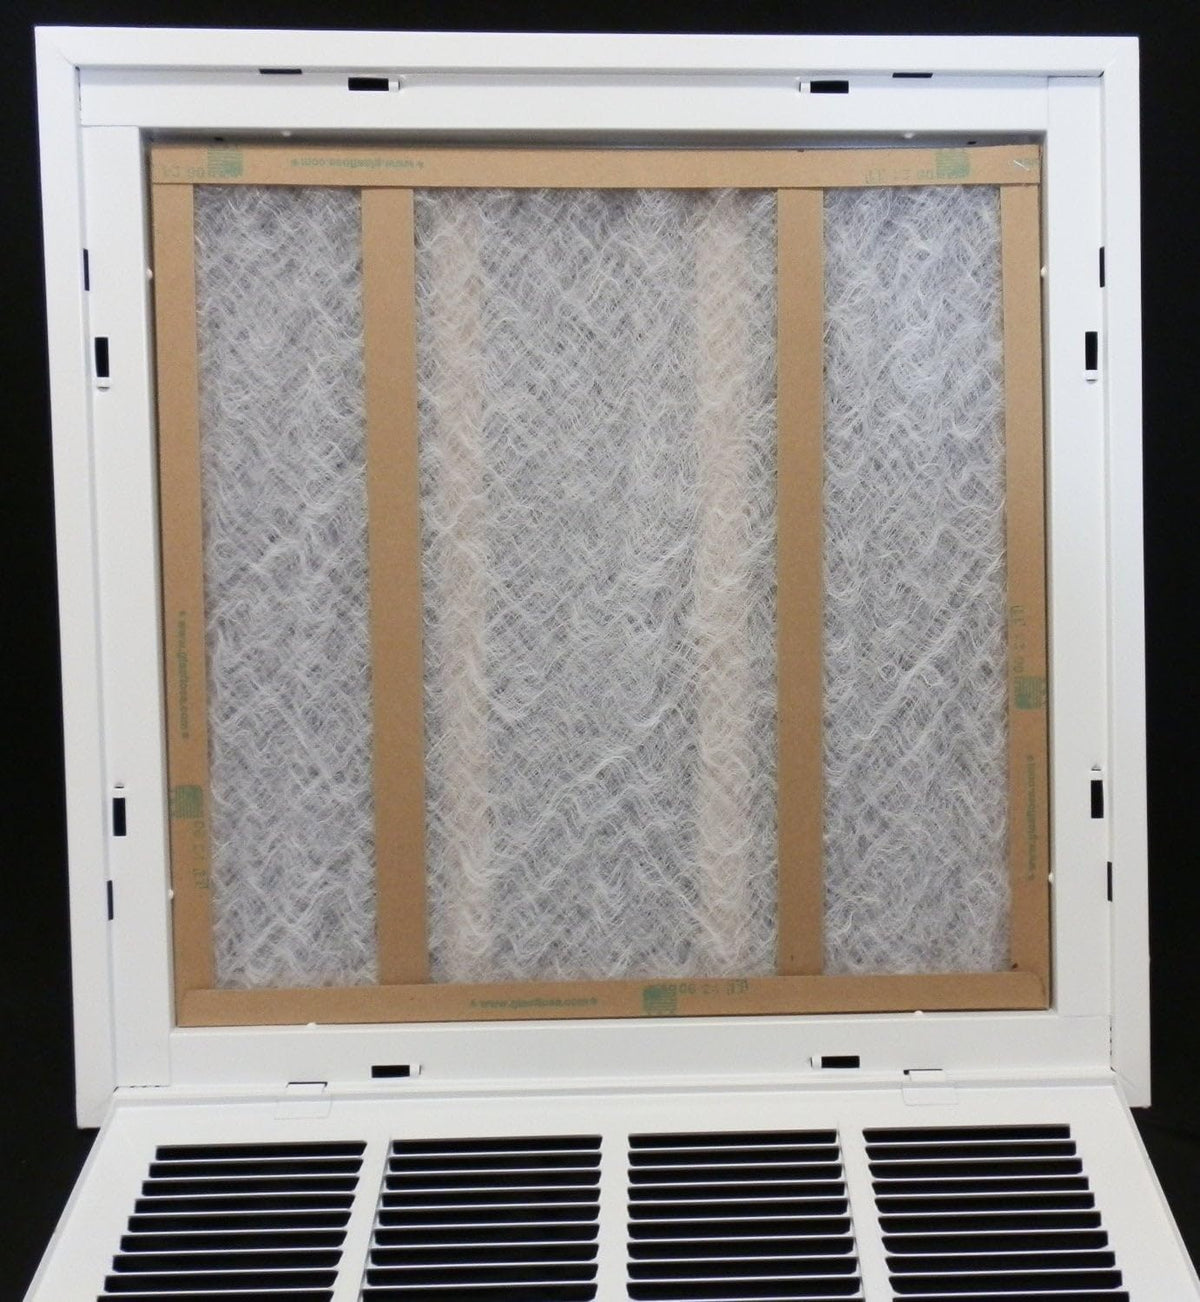 34&quot; X 34&quot; Steel Return Air Filter Grille for 1&quot; Filter - Removable Frame - [Outer Dimensions: 36 5/8&quot; X 36 5/8&quot;]